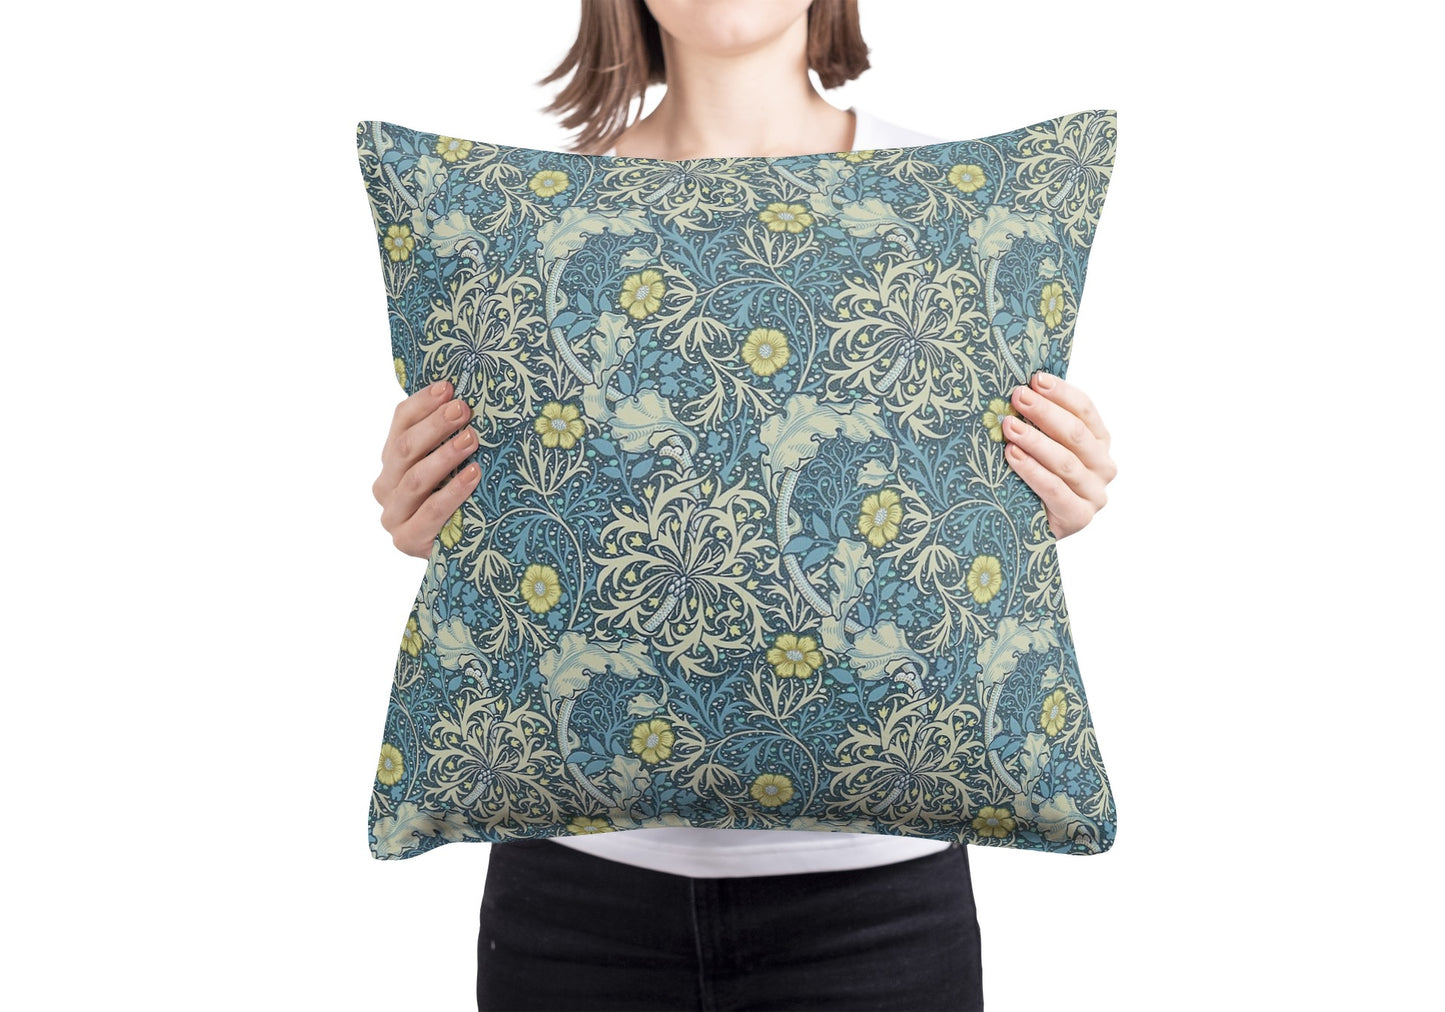 Seaweed Outdoor Pillows William Morris Ink Woad Blue